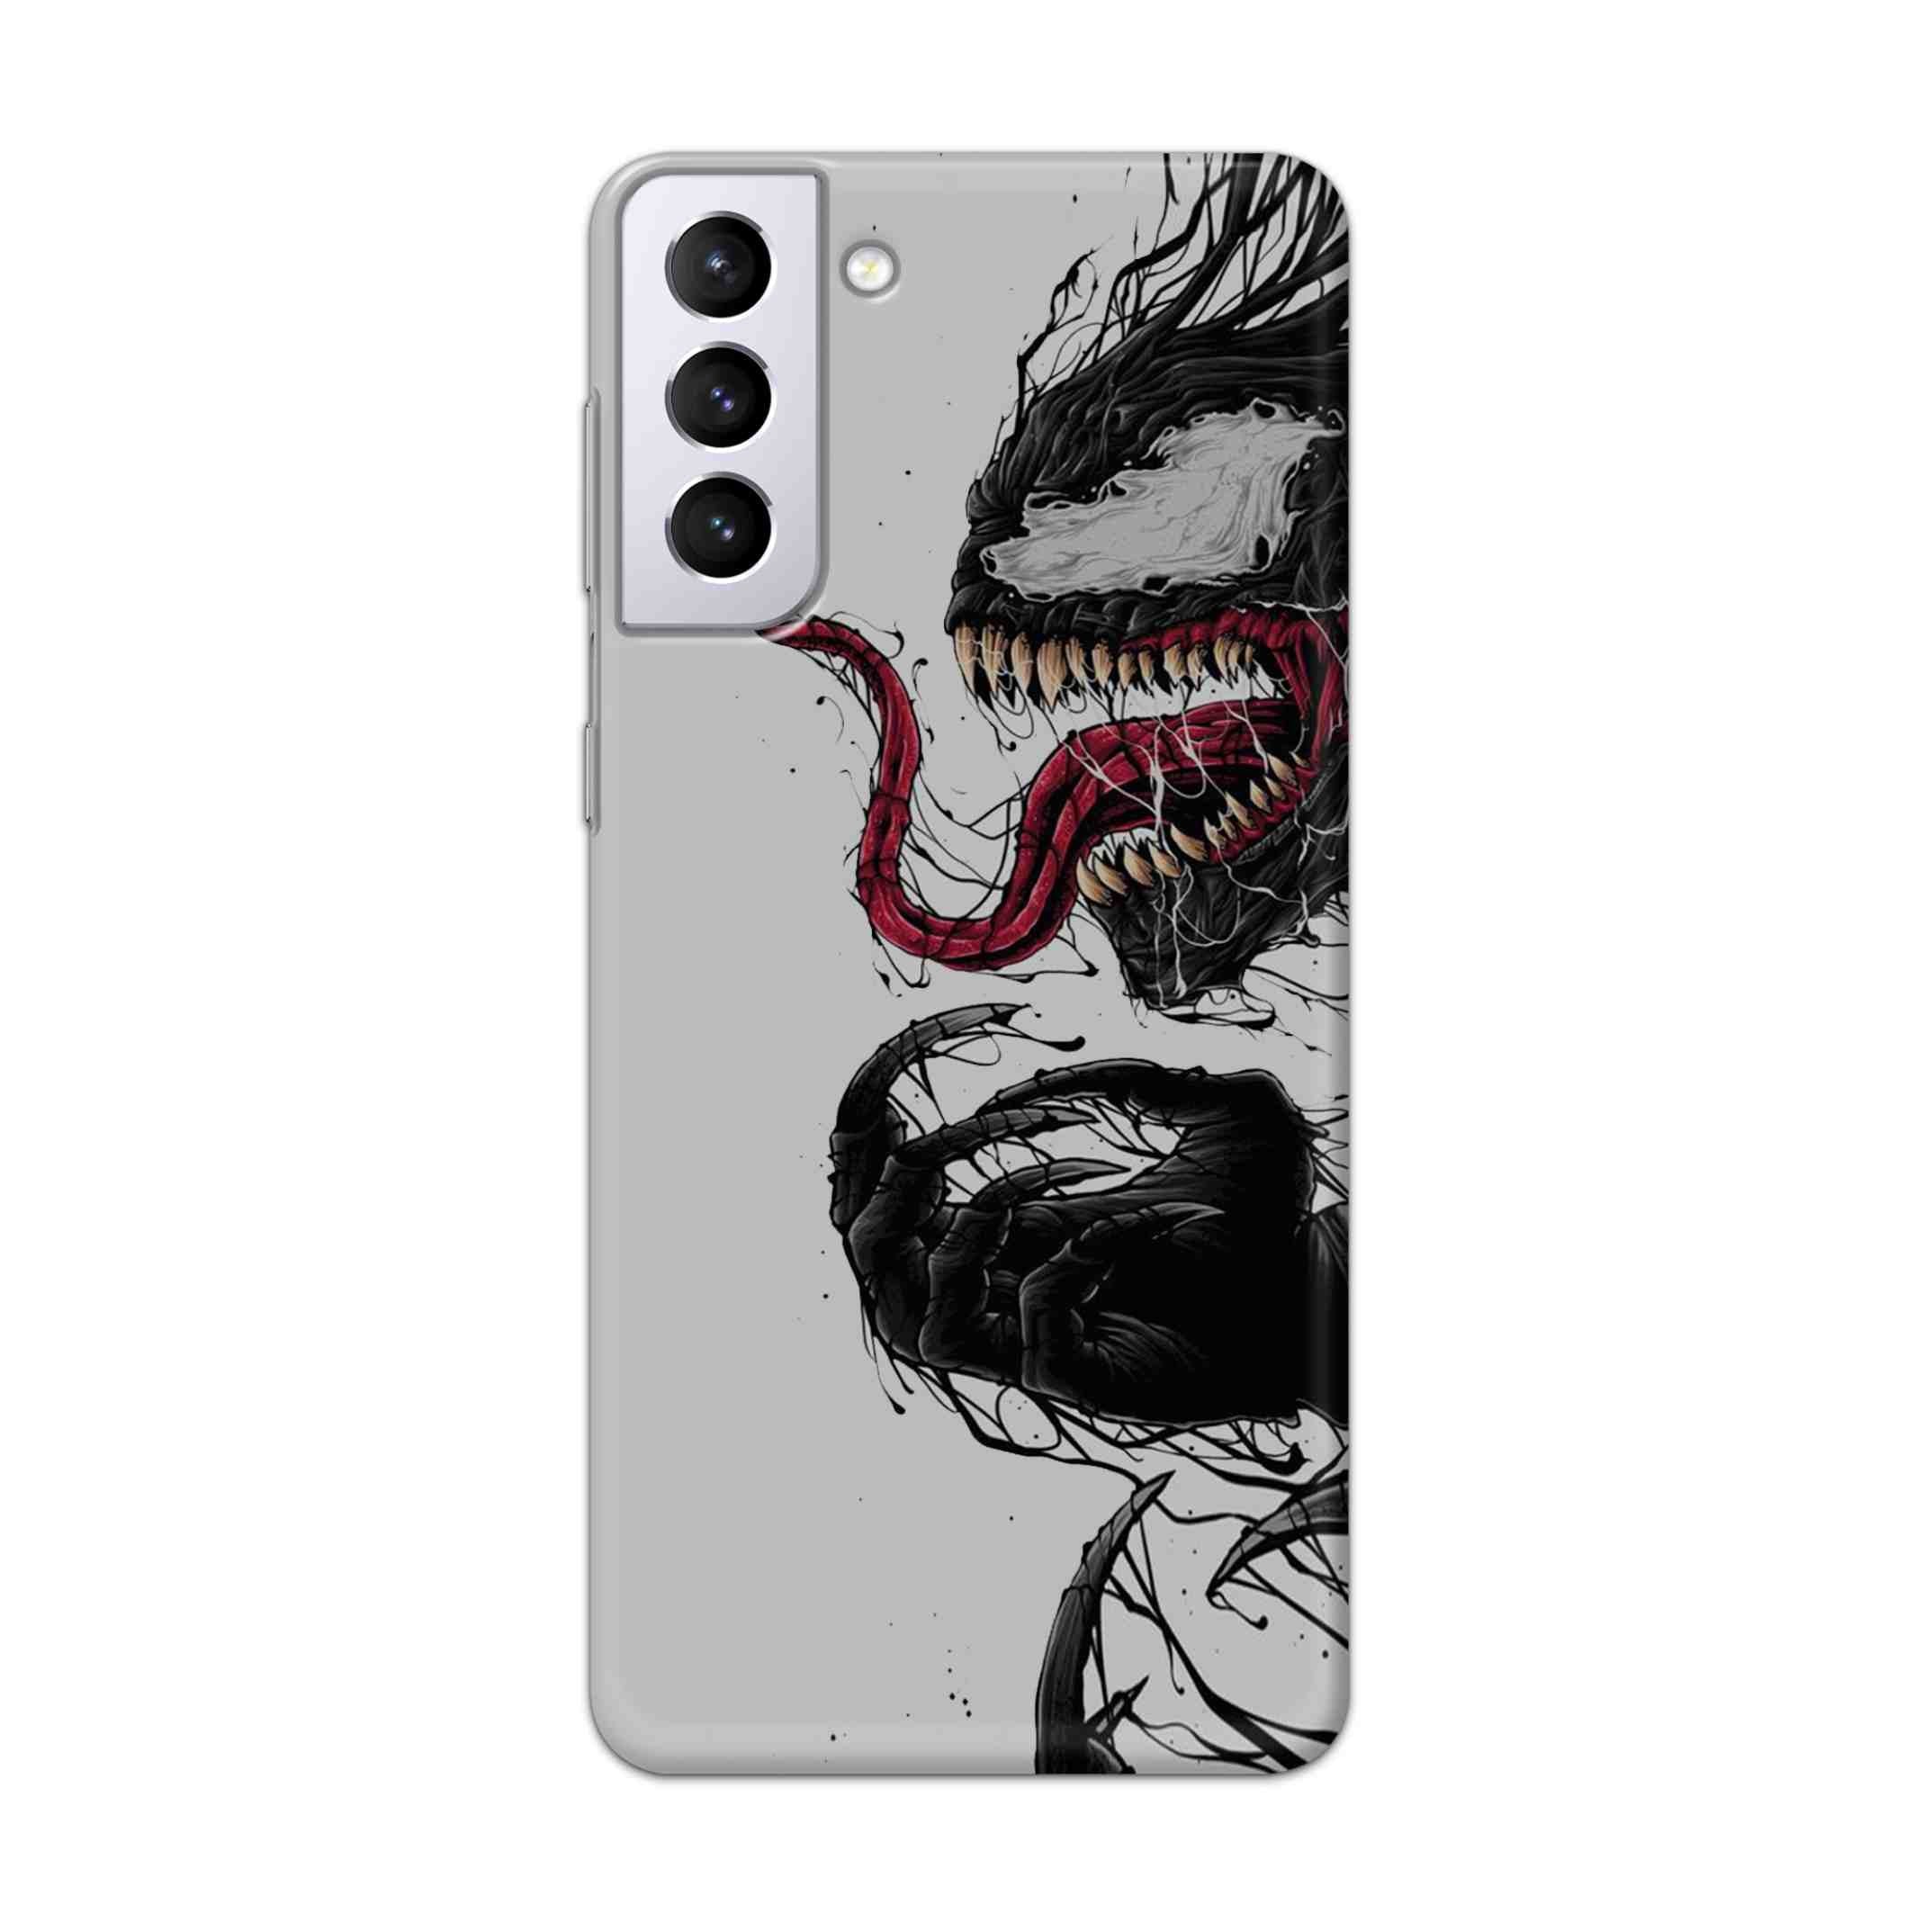 Buy Venom Crazy Hard Back Mobile Phone Case Cover For Samsung Galaxy S21 Plus Online